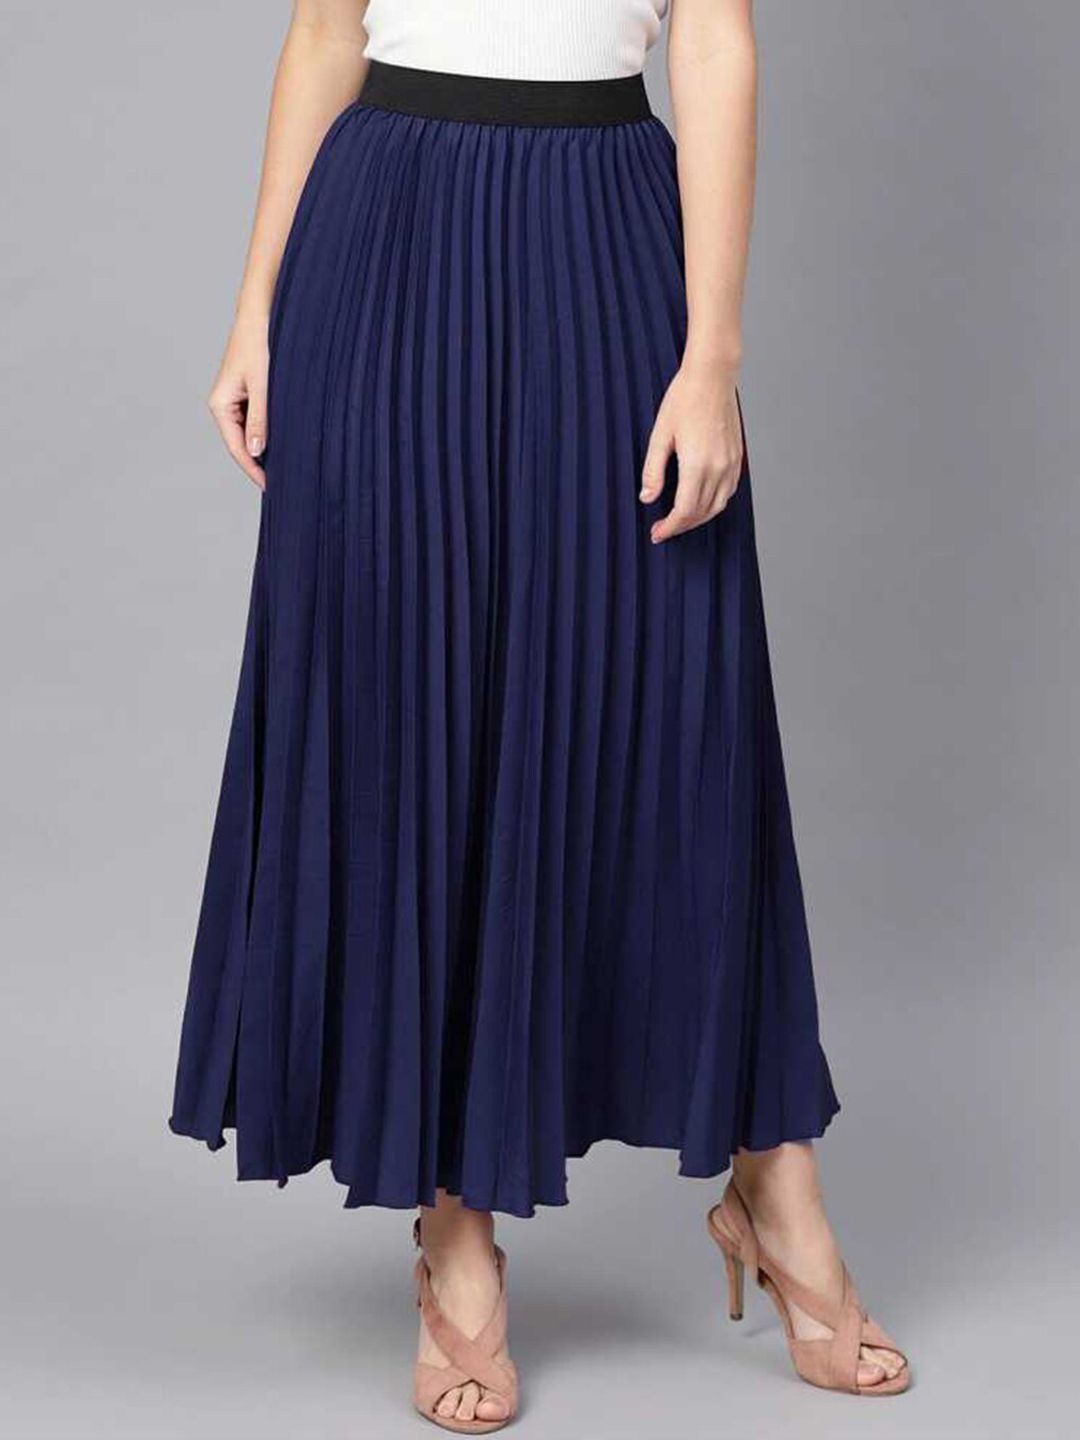 DEKLOOK Accordion Pleated A-Line Maxi Skirt Price in India